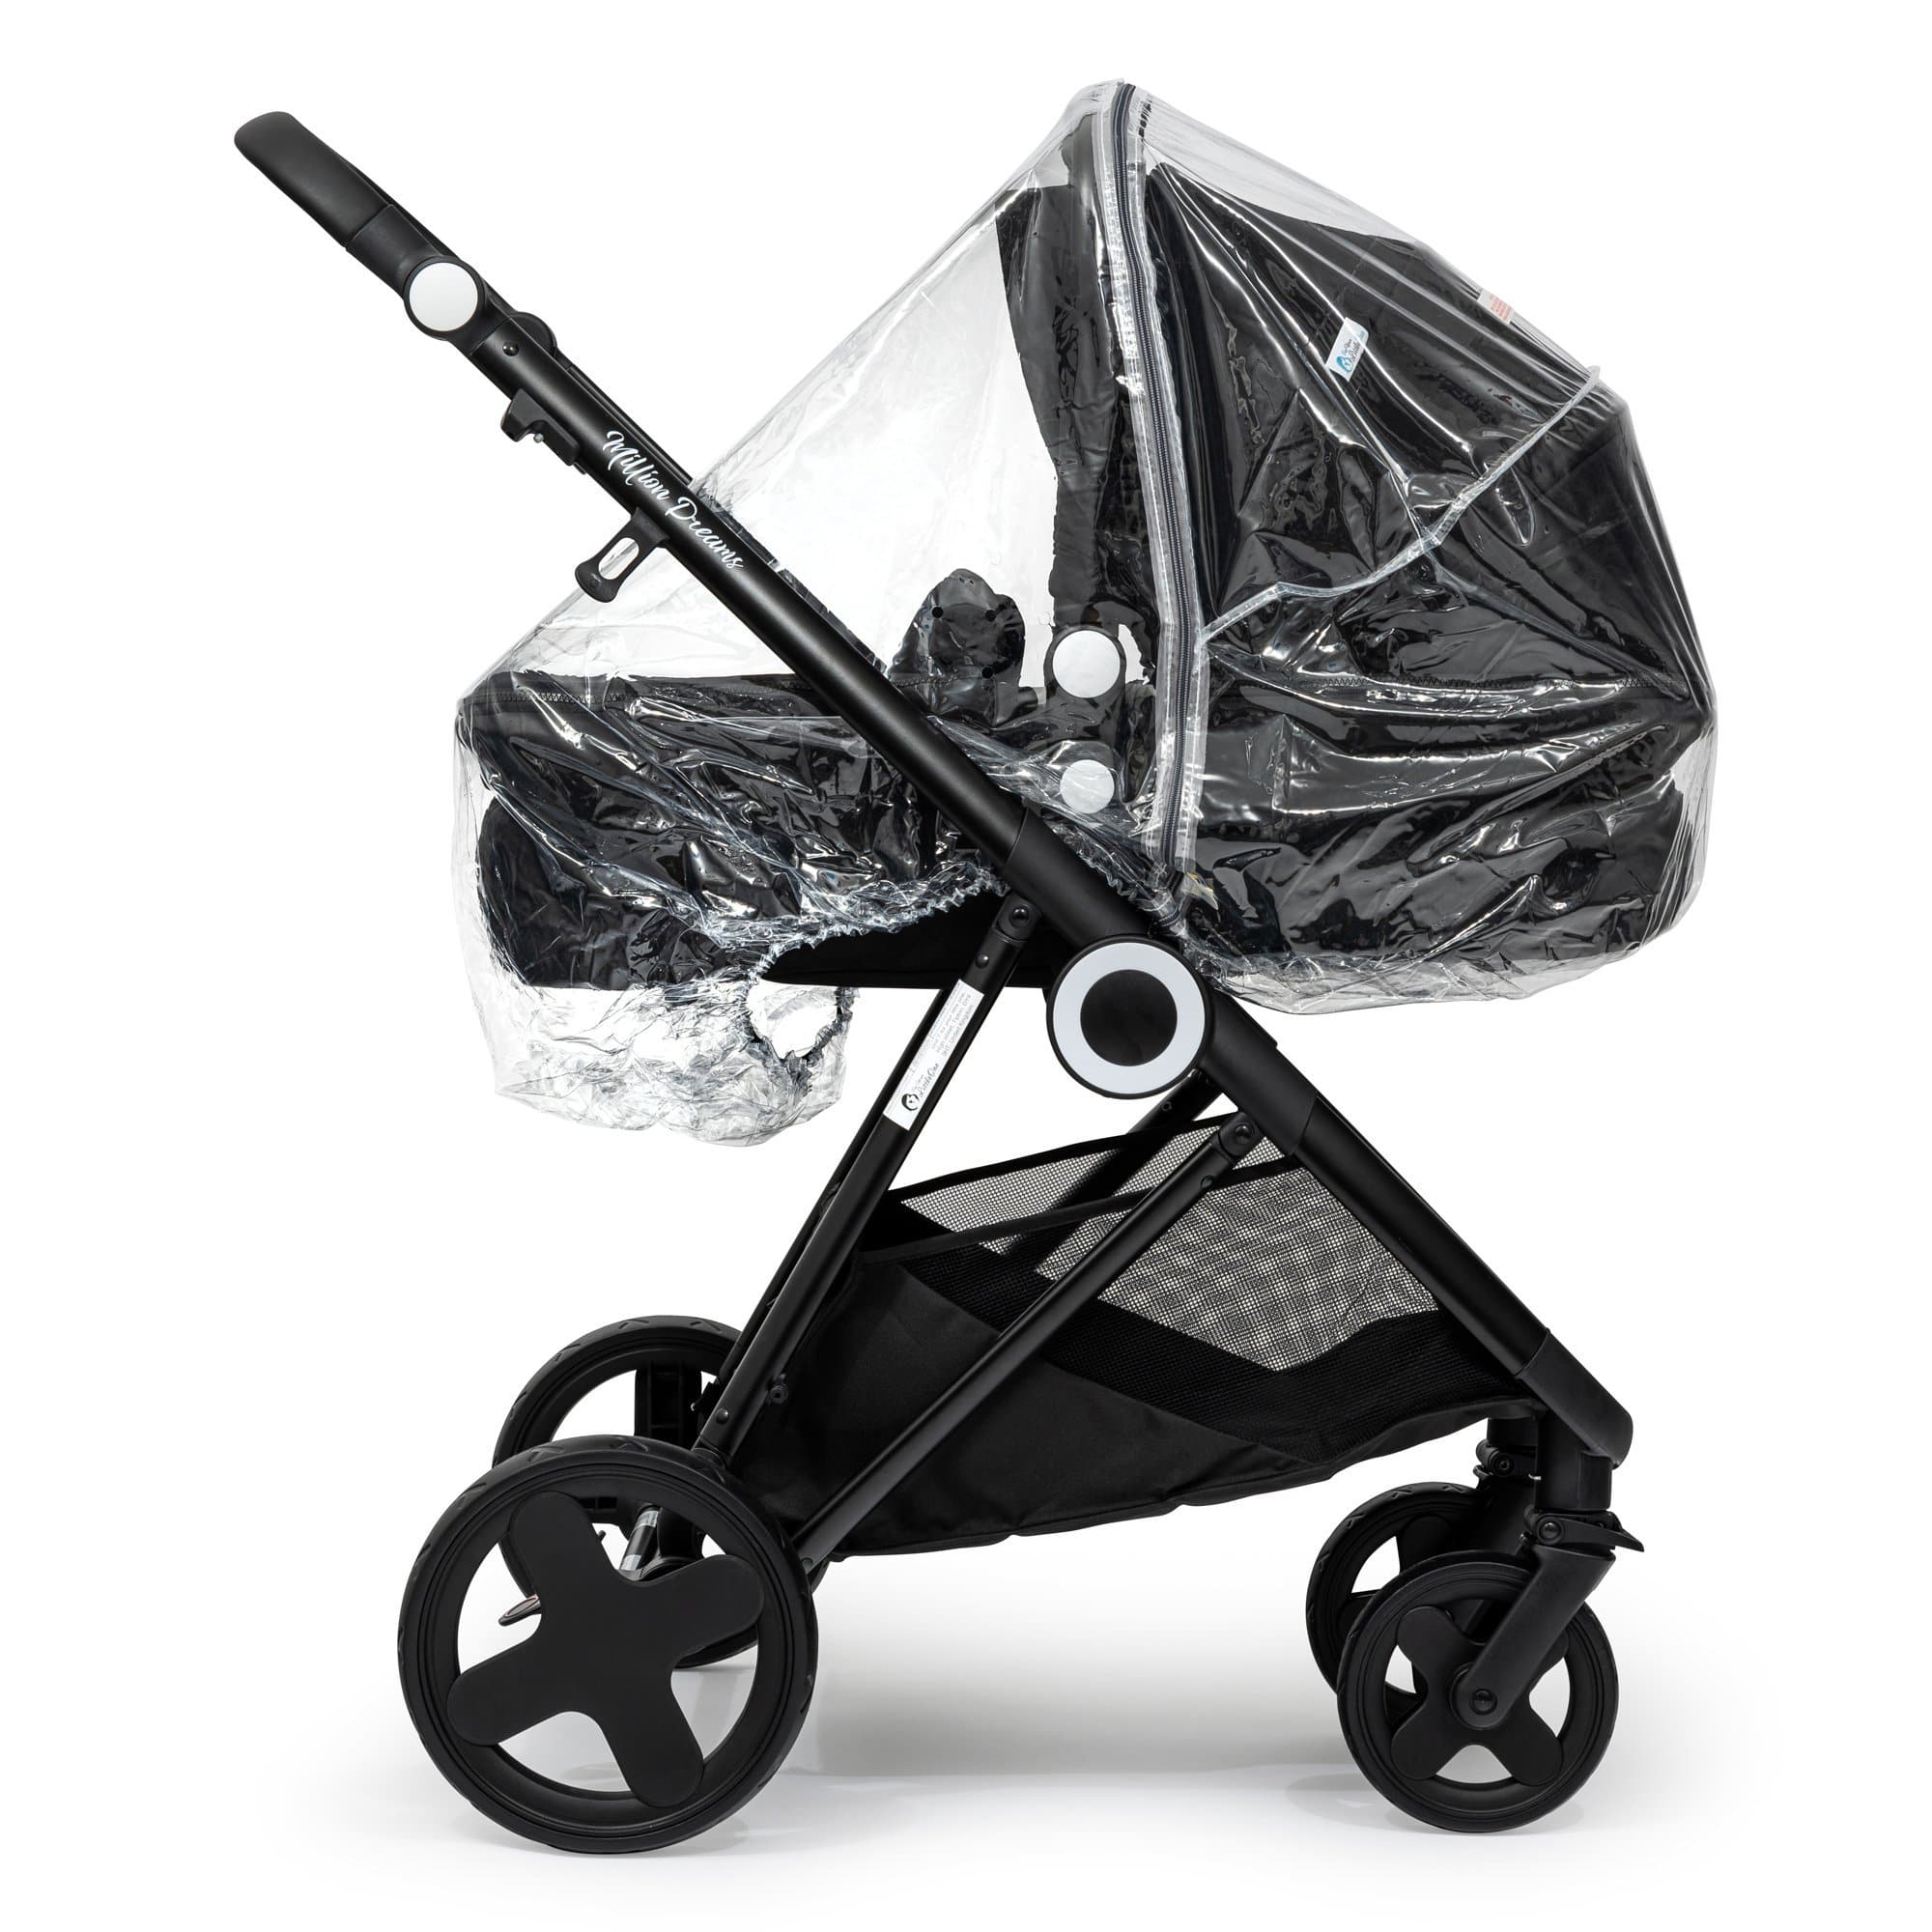 2 in 1 Rain Cover Compatible with BabyCare - Fits All Models - For Your Little One